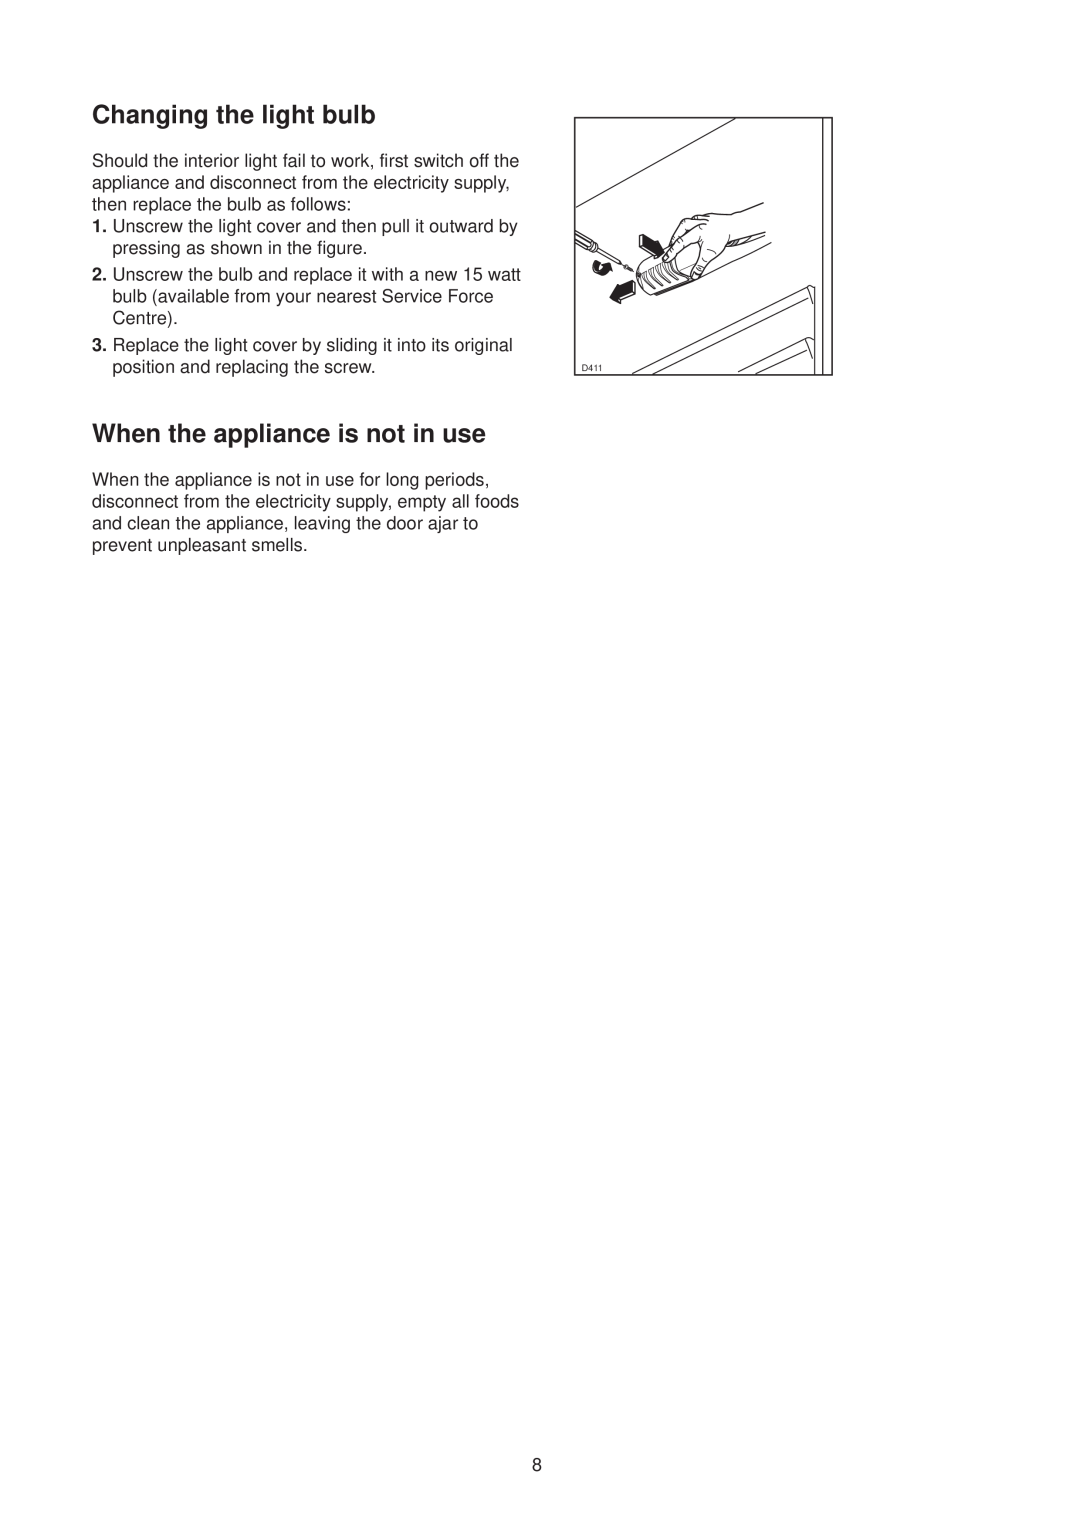 Electrolux U21312 manual Changing the light bulb, When the appliance is not in use, D411 